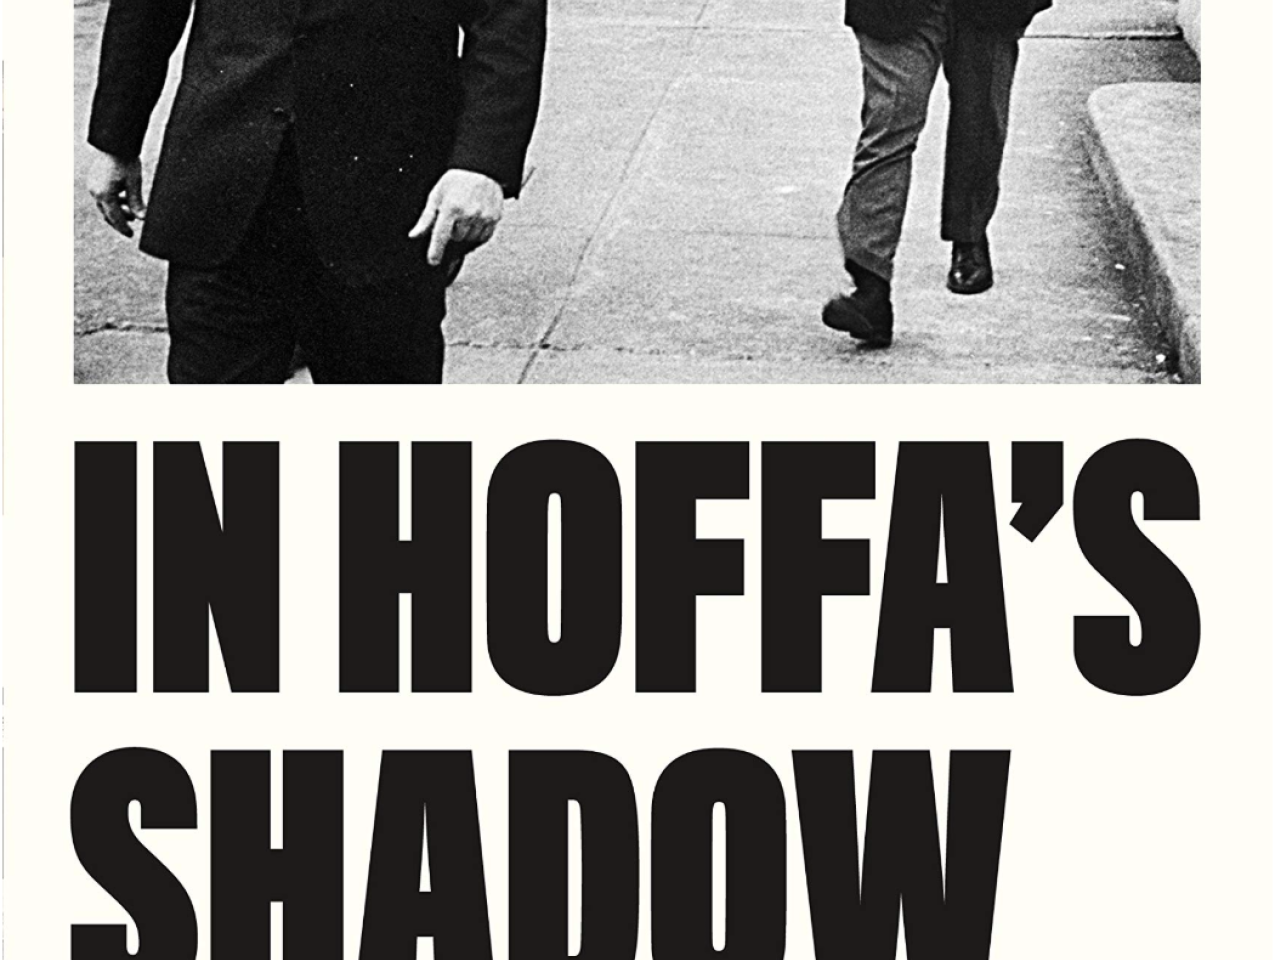 Image for Jack Goldsmith: In Hoffa's Shadow